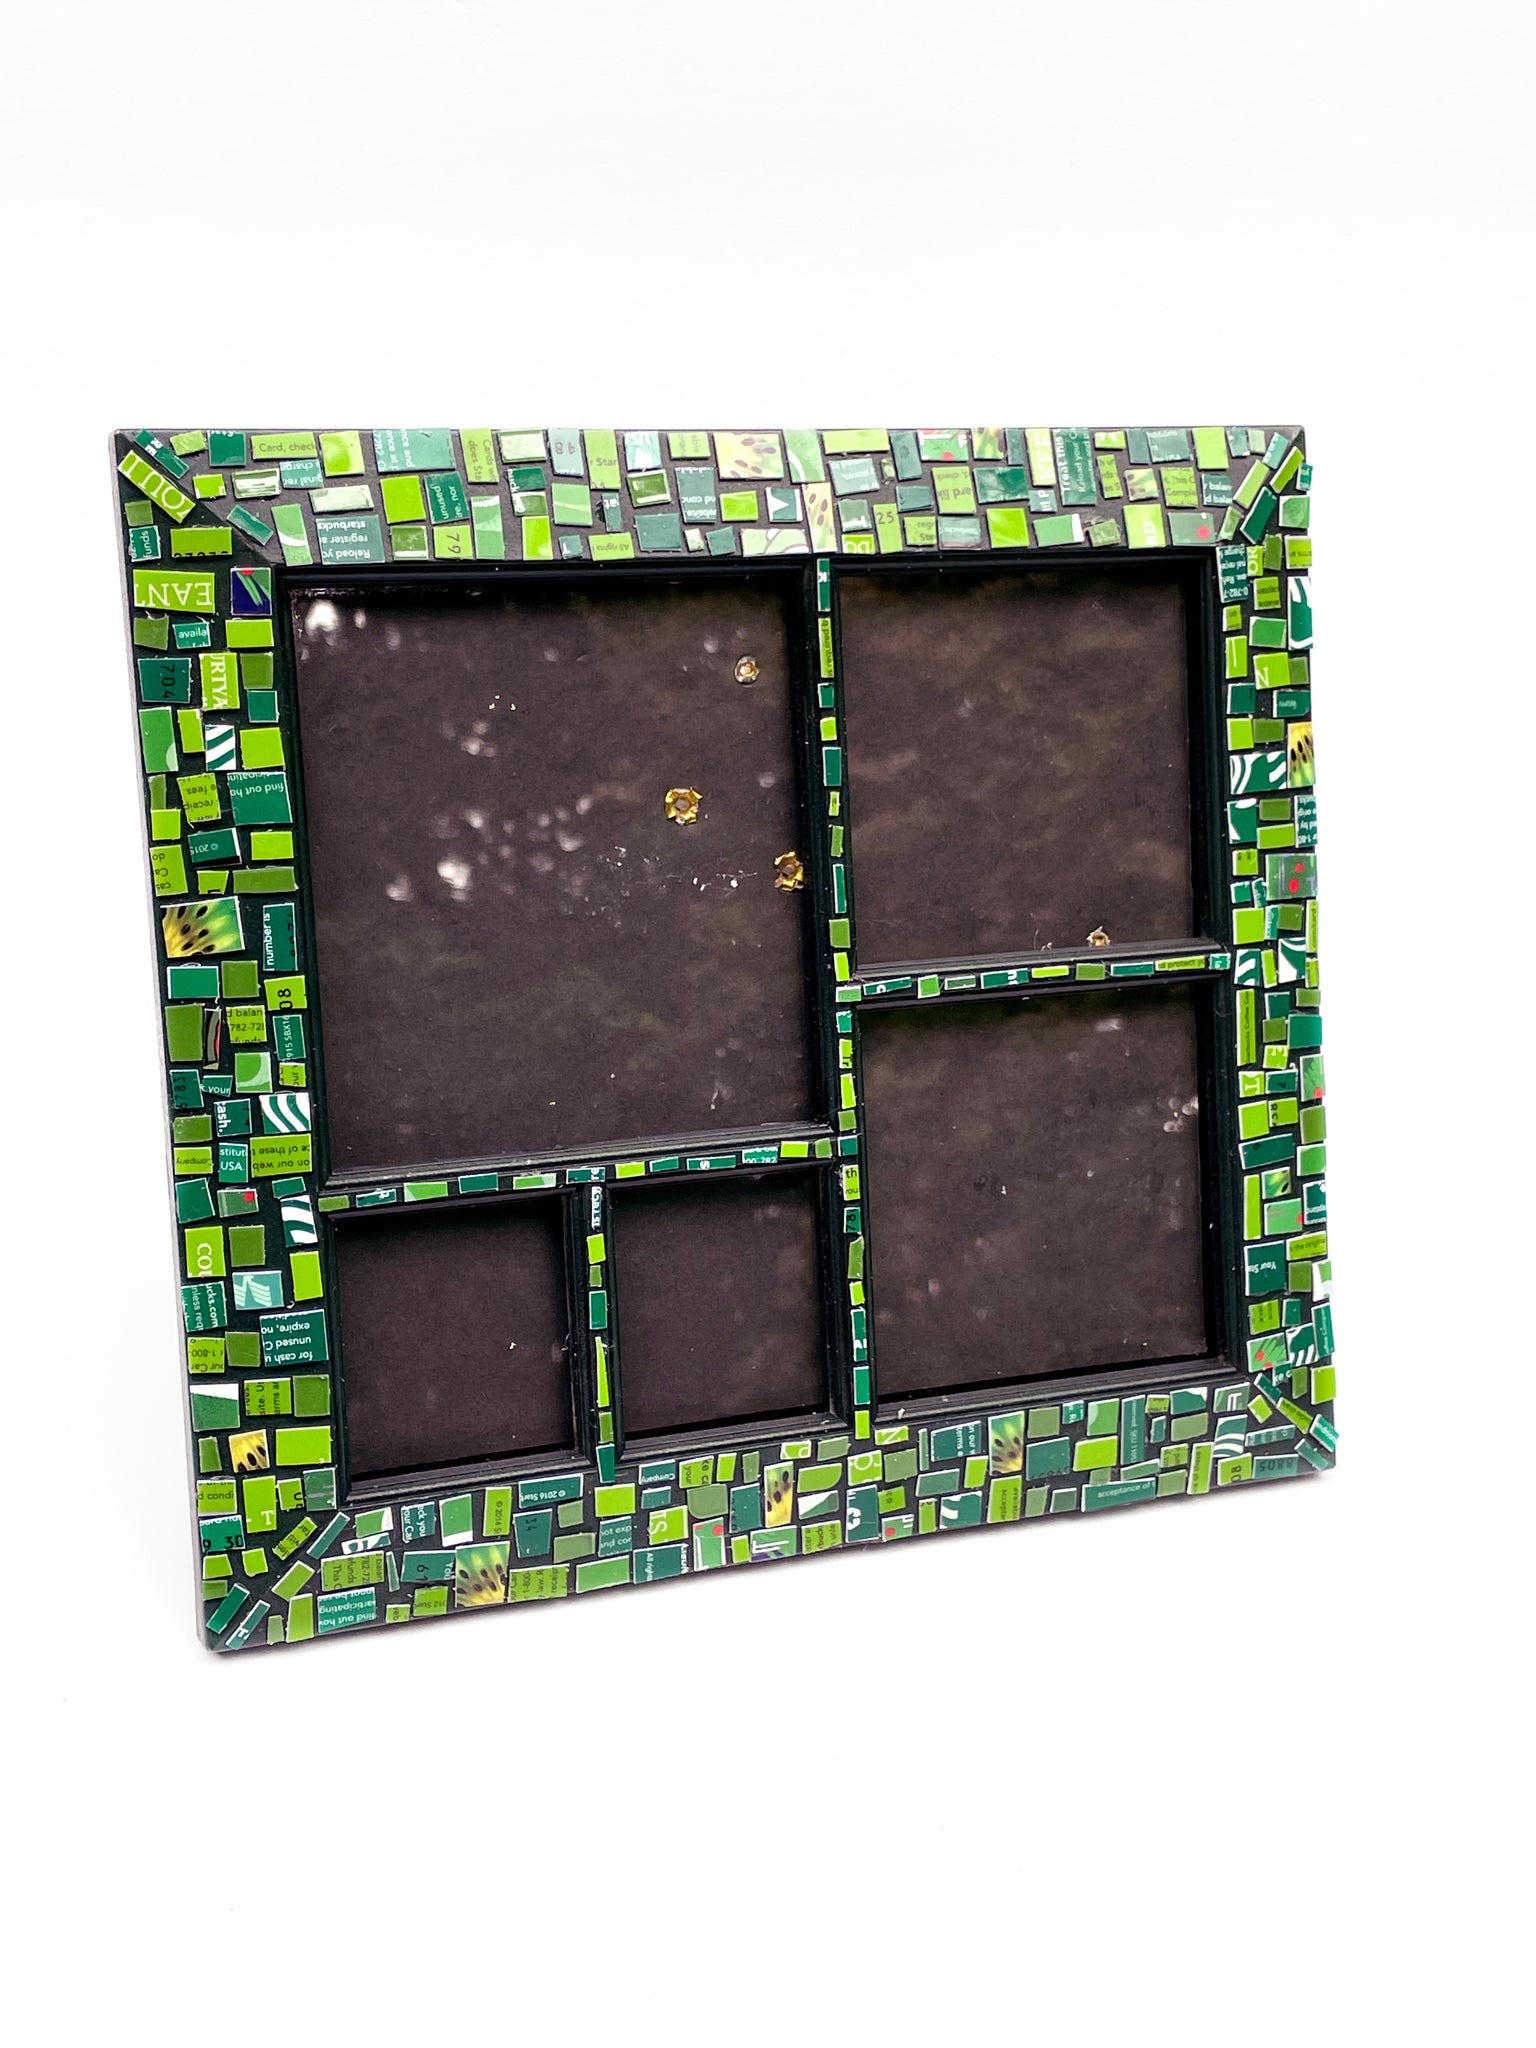 Gift Card Mosaic Picture Frame - Green on Green Frame - Holds Multiple Photos of Various Sizes